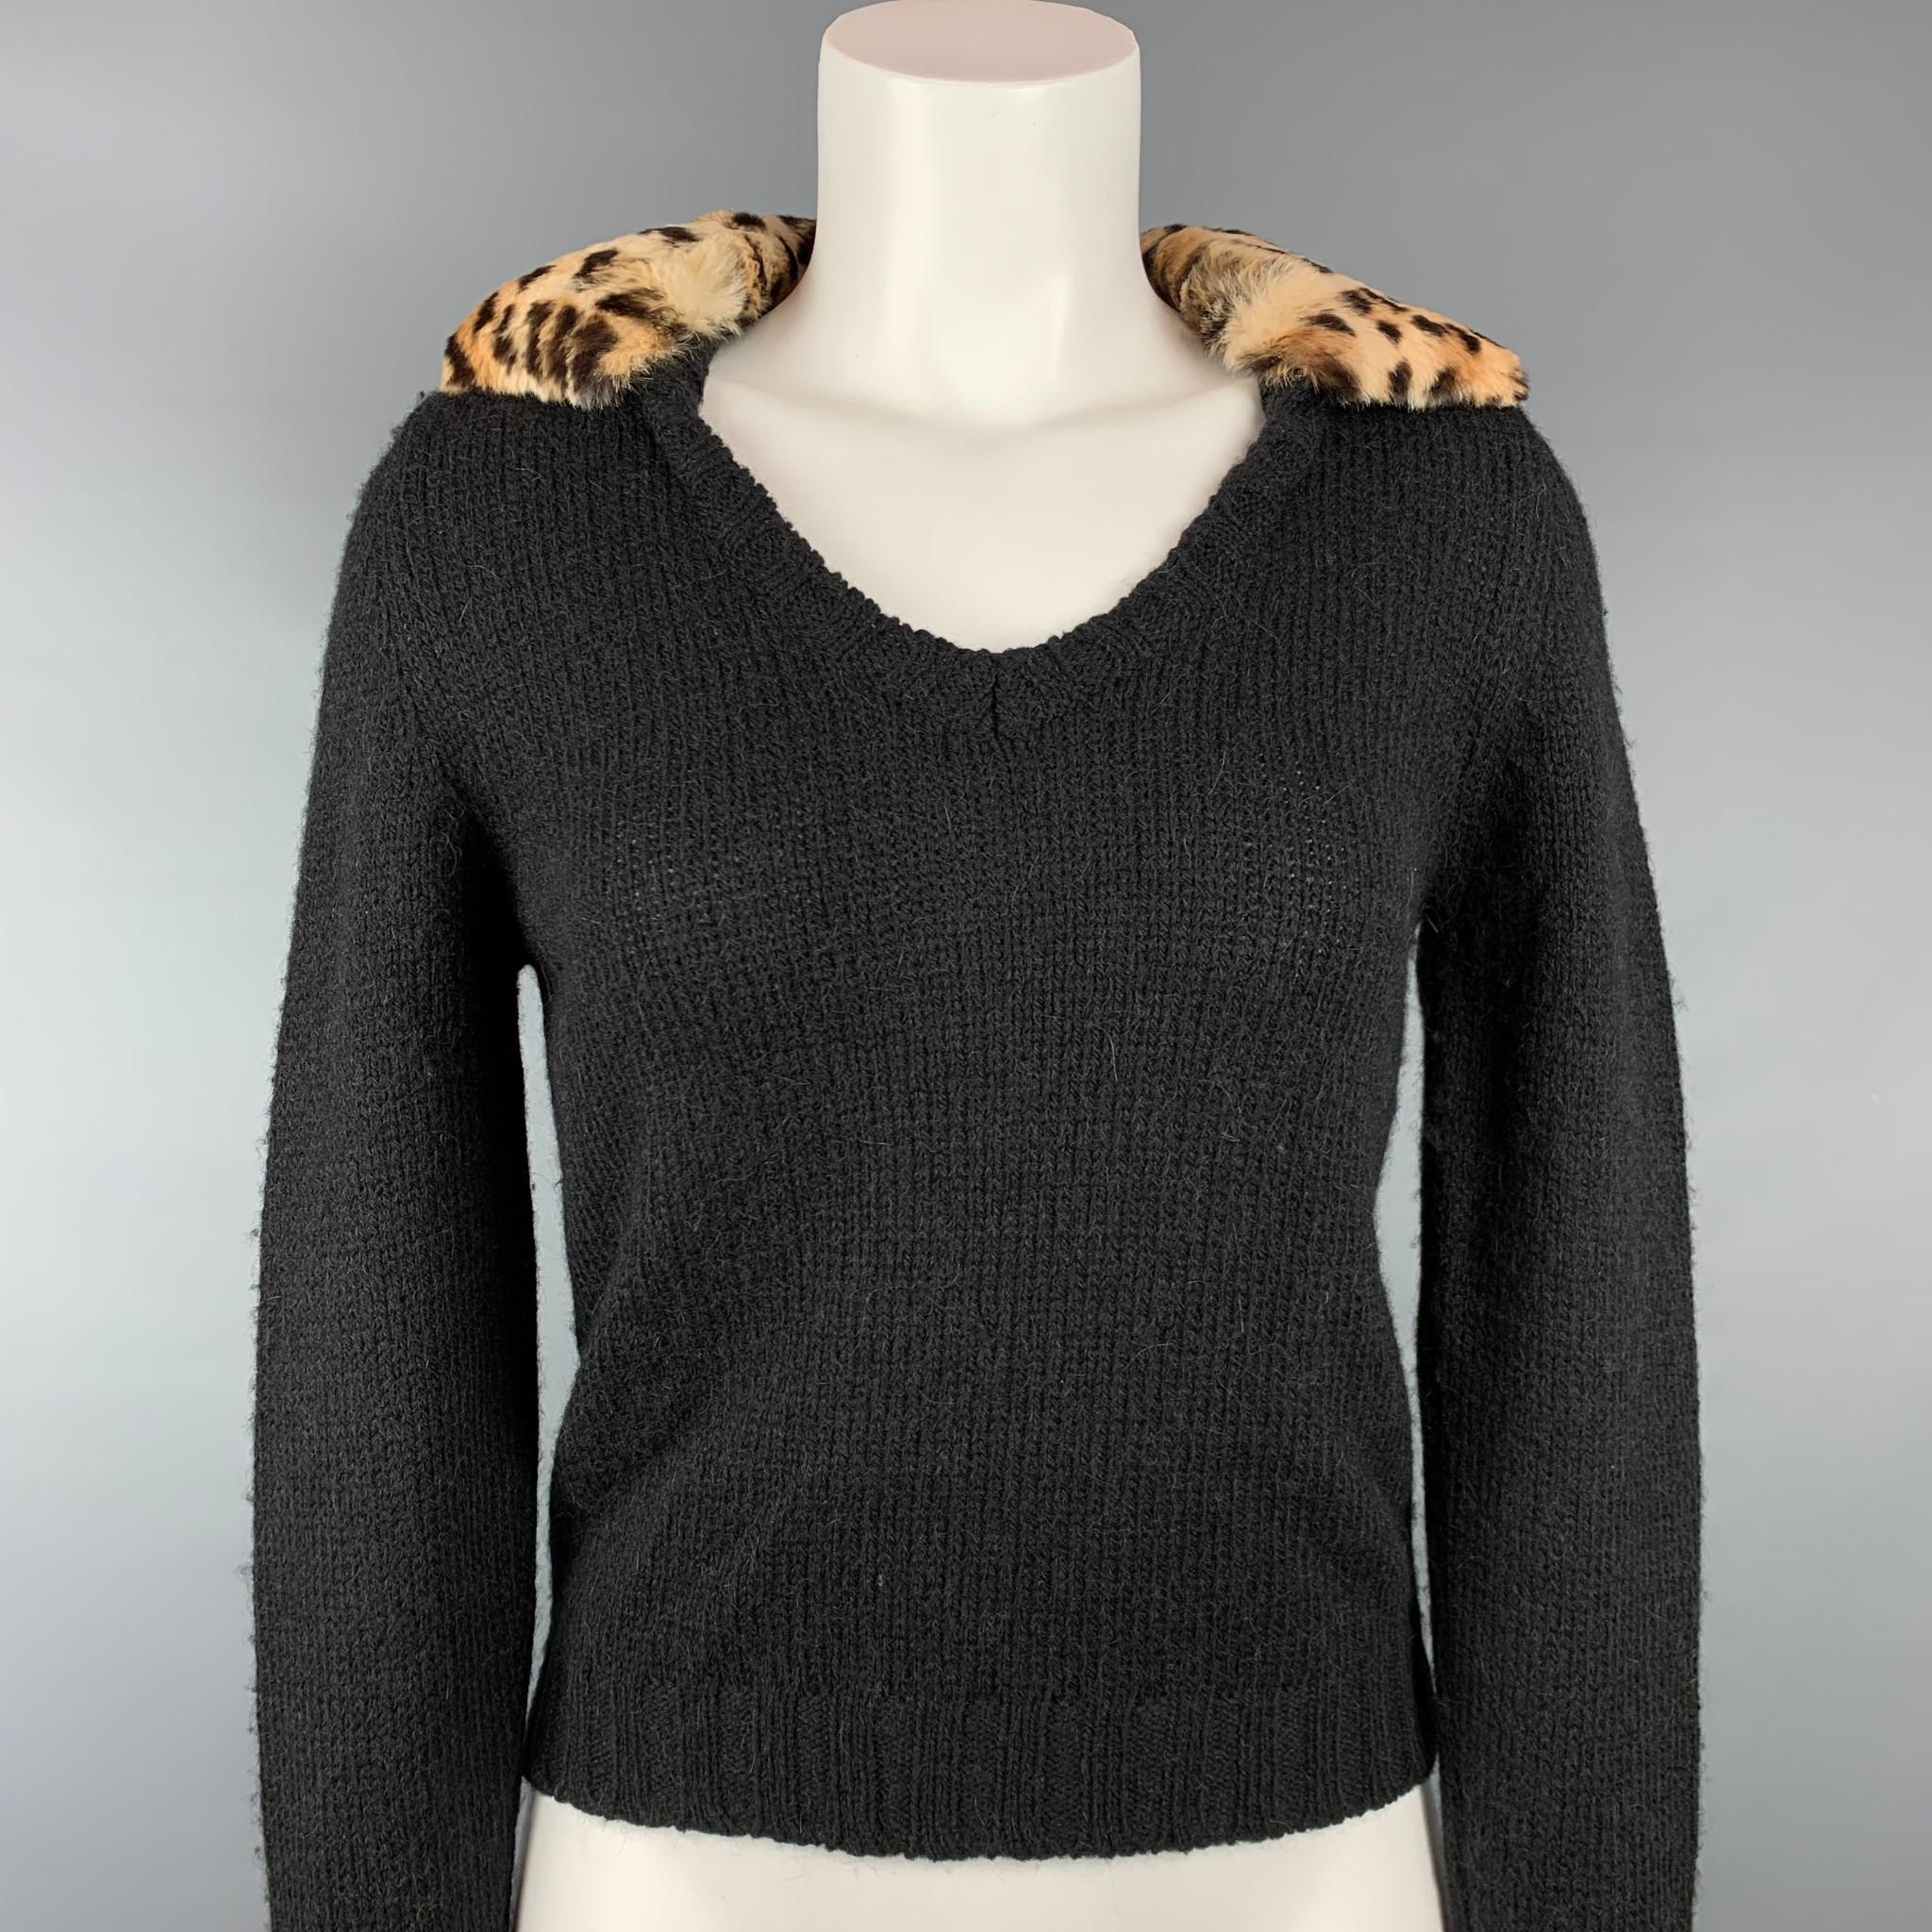 BLUMARINE pullover comes in black knitted wool blend featuring a fur trim and v-neck. Made in Italy.

Very Good Pre-Owned Condition.
Marked: I 40 / D 34 

Measurements:

Shoulder: 14 in.
Bust: 34 in.
Sleeve: 29.5 in.
Length: 21 in. 